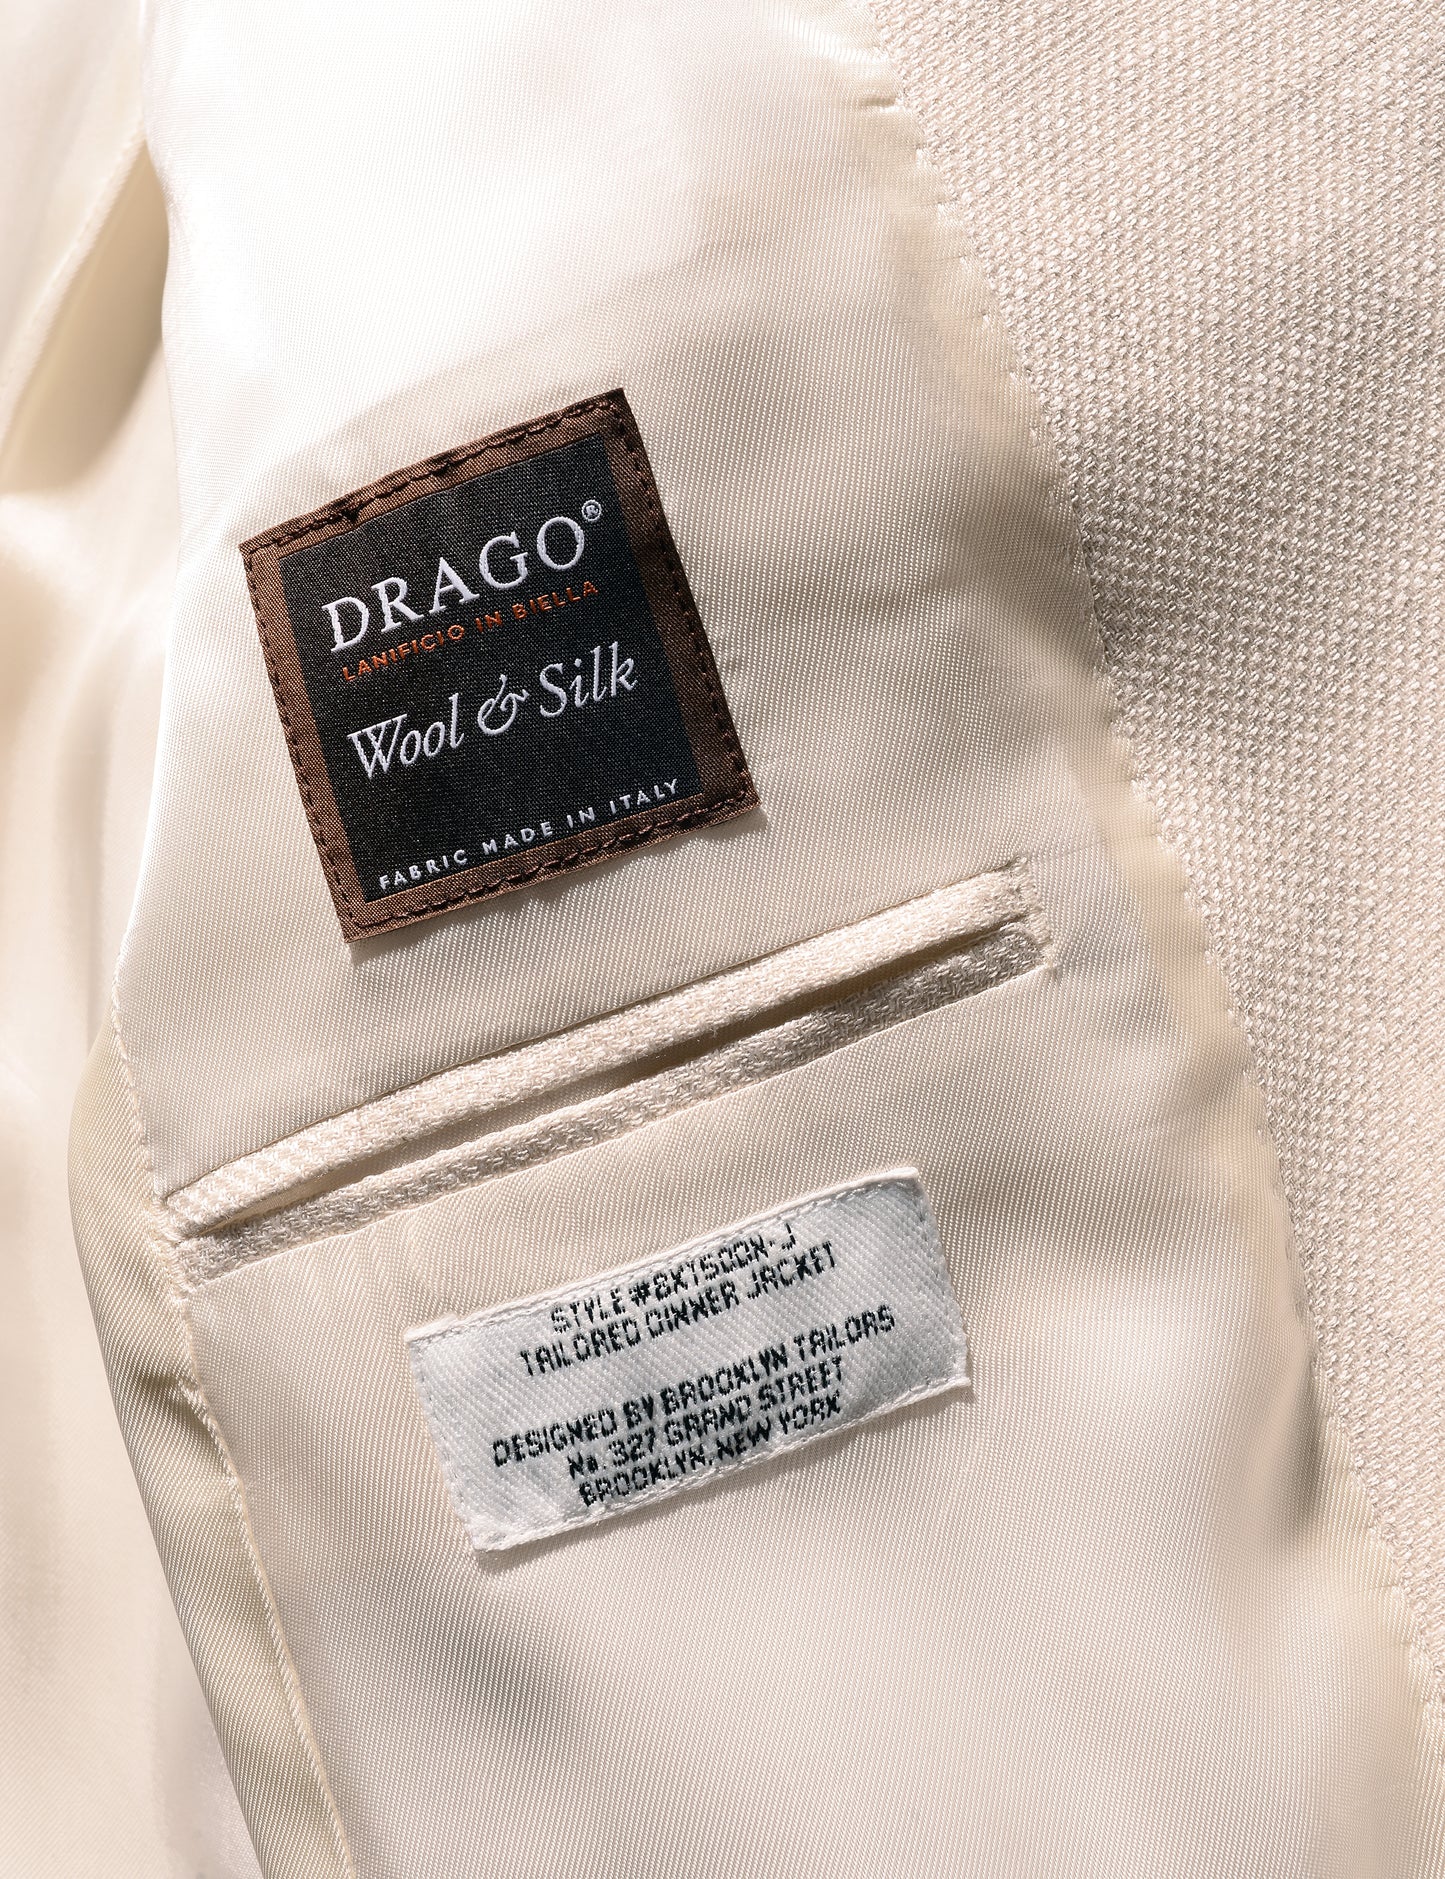 Detail shot of Brooklyn tailors BKT50 Shawl Collar Dinner Jacket in Silk & Wool Textured Weave - Ivory showing Drago label on interior panel of jacket